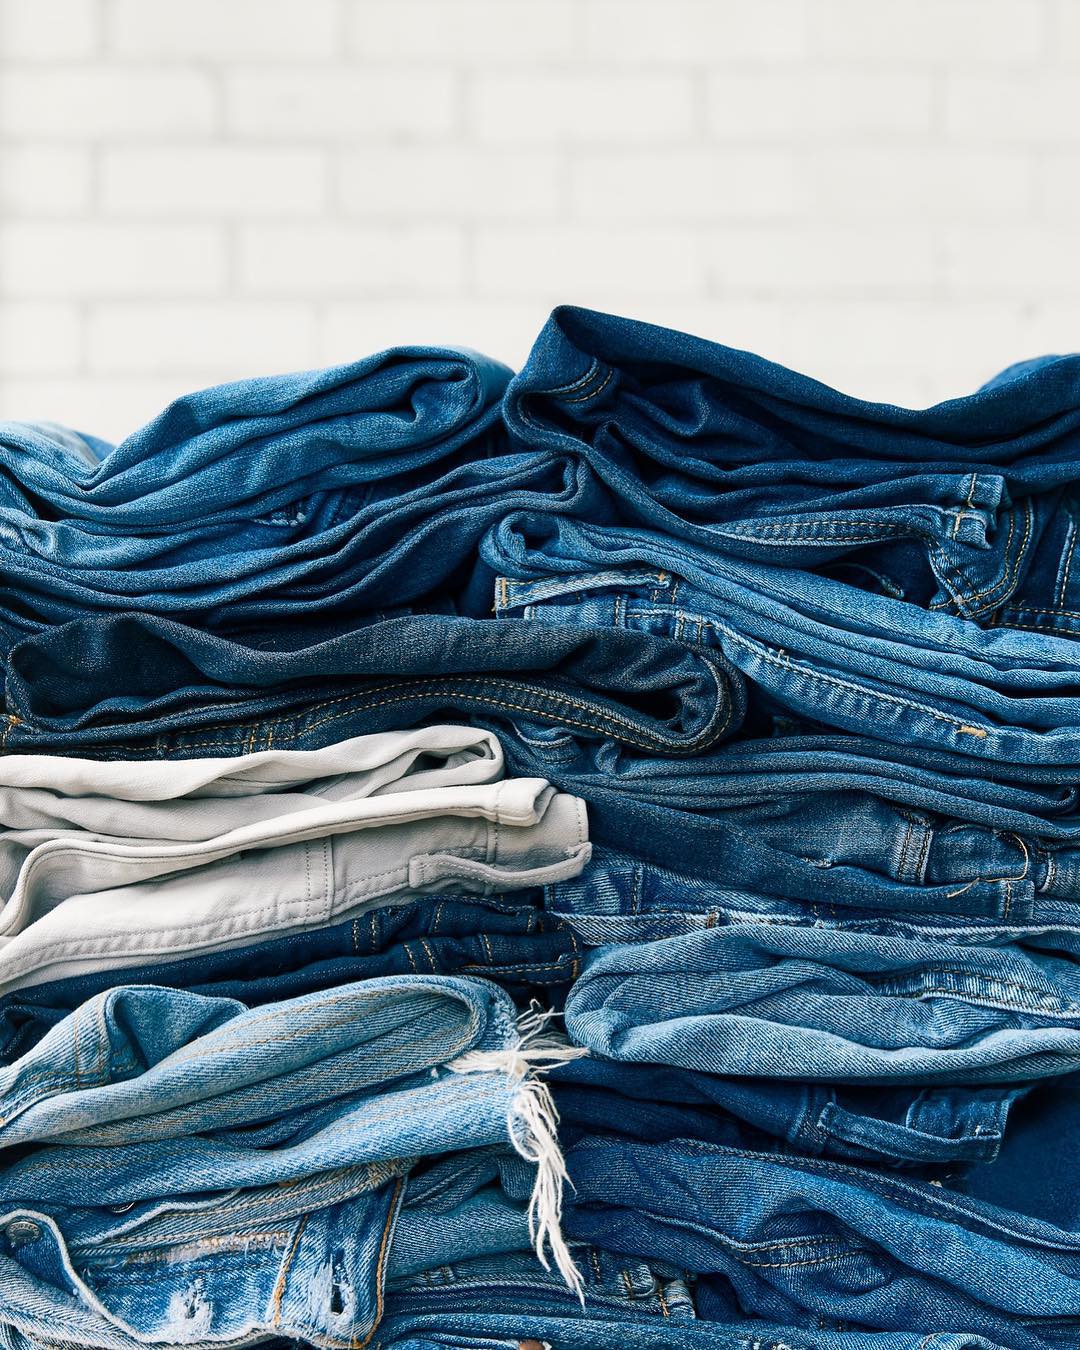 Go green with your jeans! @beijaflorjeans has partnered with ...